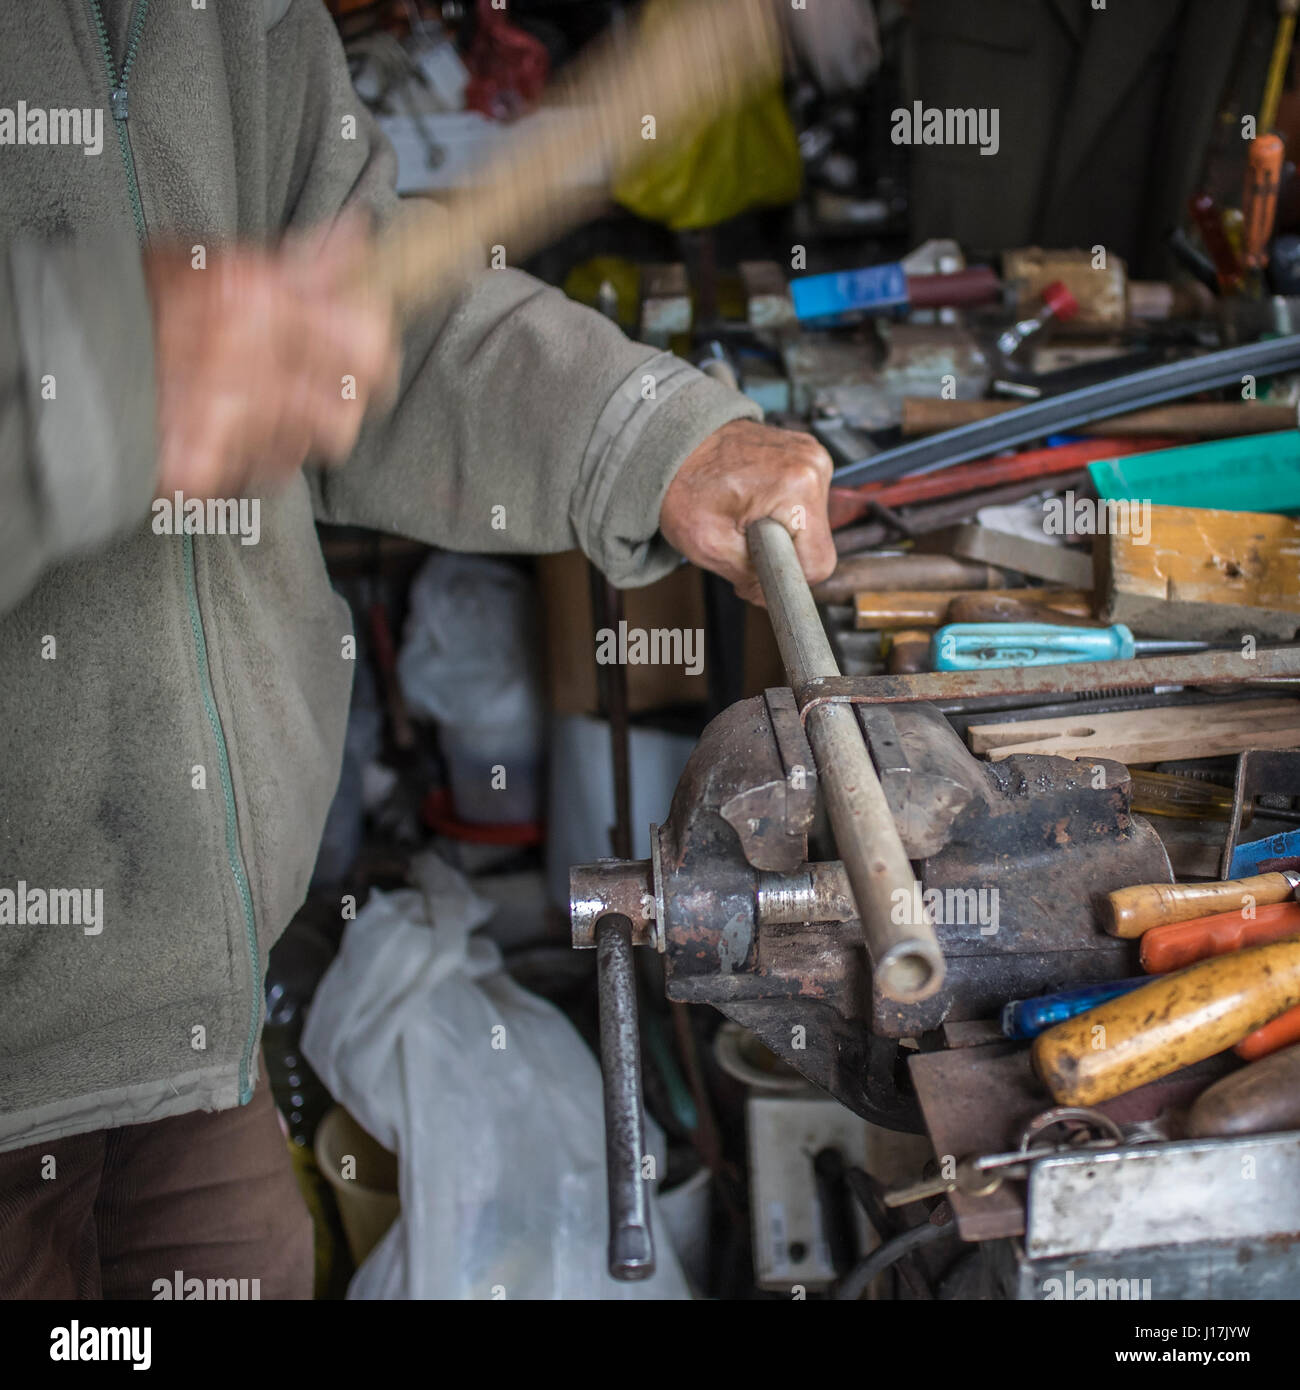 Metalworker works metal with hammer, candid photography Stock Photo